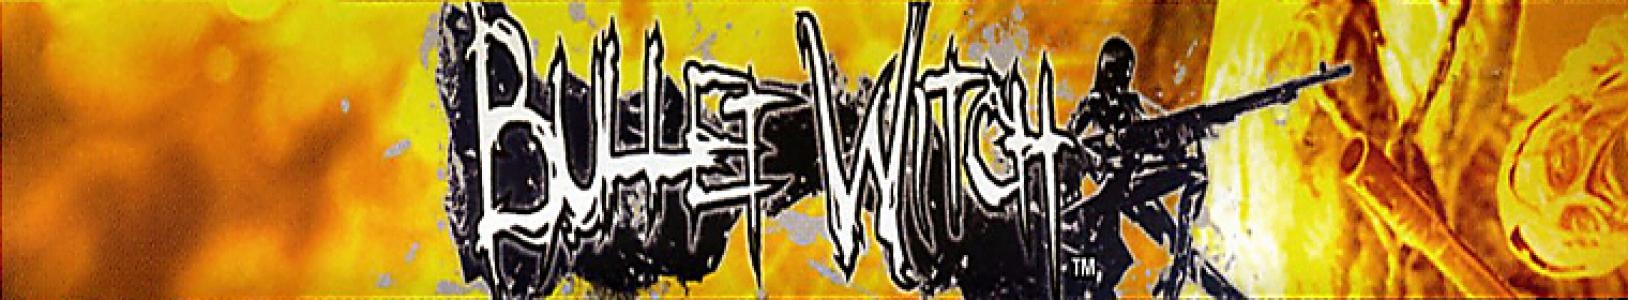 Bullet Witch banner